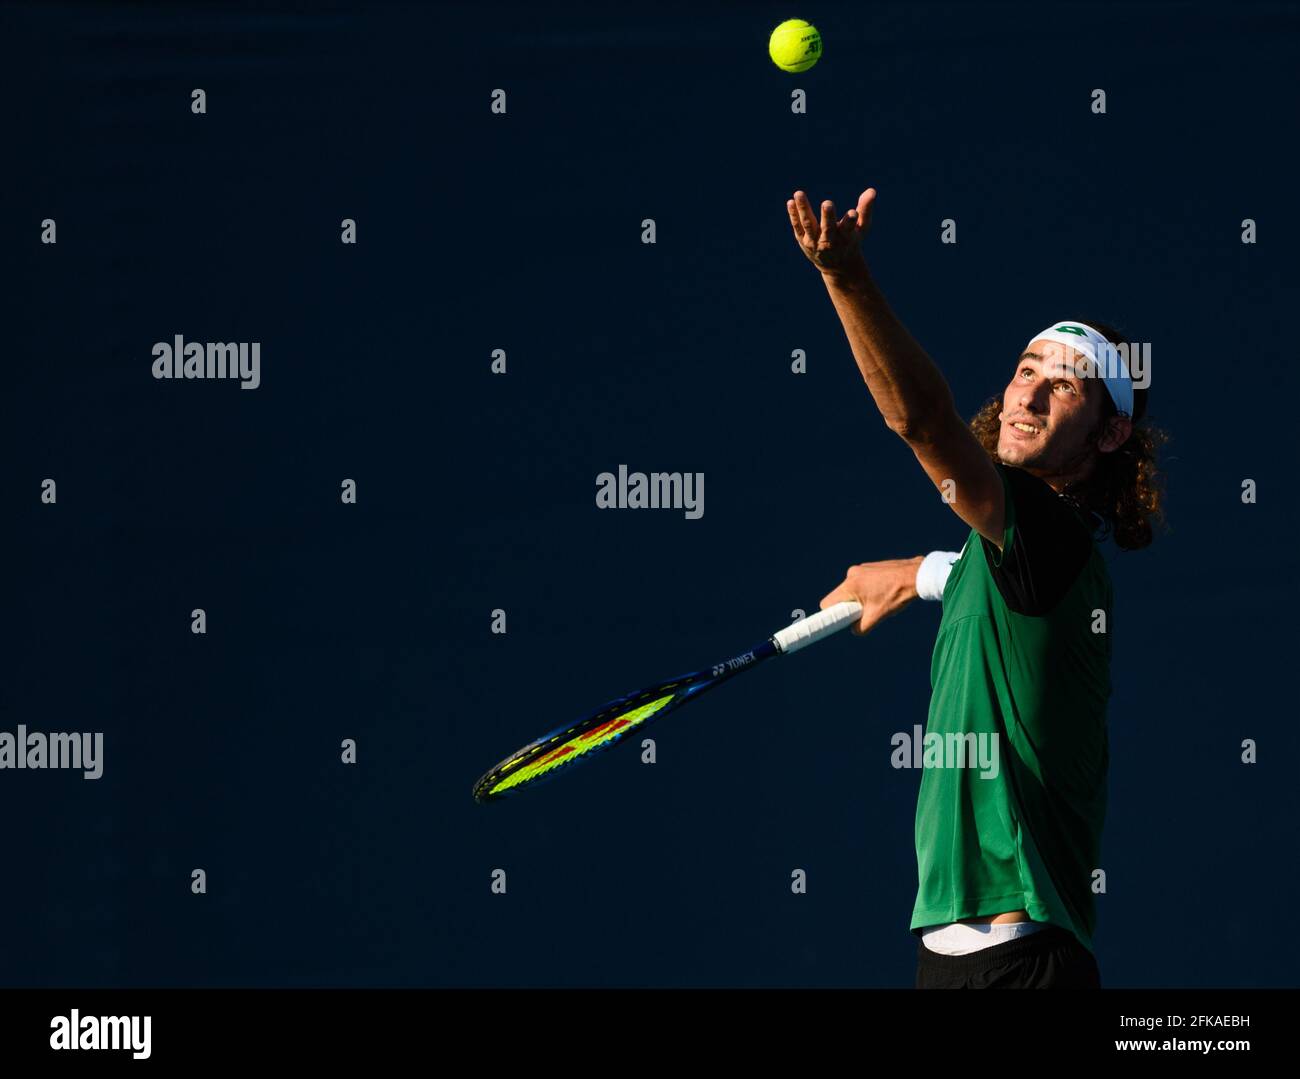 Miami Gardens, Florida, USA. 24th Mar, 2021. Lloyd Harris of South Africa serves the ball during his victory over Emilio Nava of the United States in the first round at the Miami Open on March 24, 2021 on the grounds of Hard Rock Stadium in Miami Gardens, Florida. Mike Lawrence/CSM/Alamy Live News Stock Photo